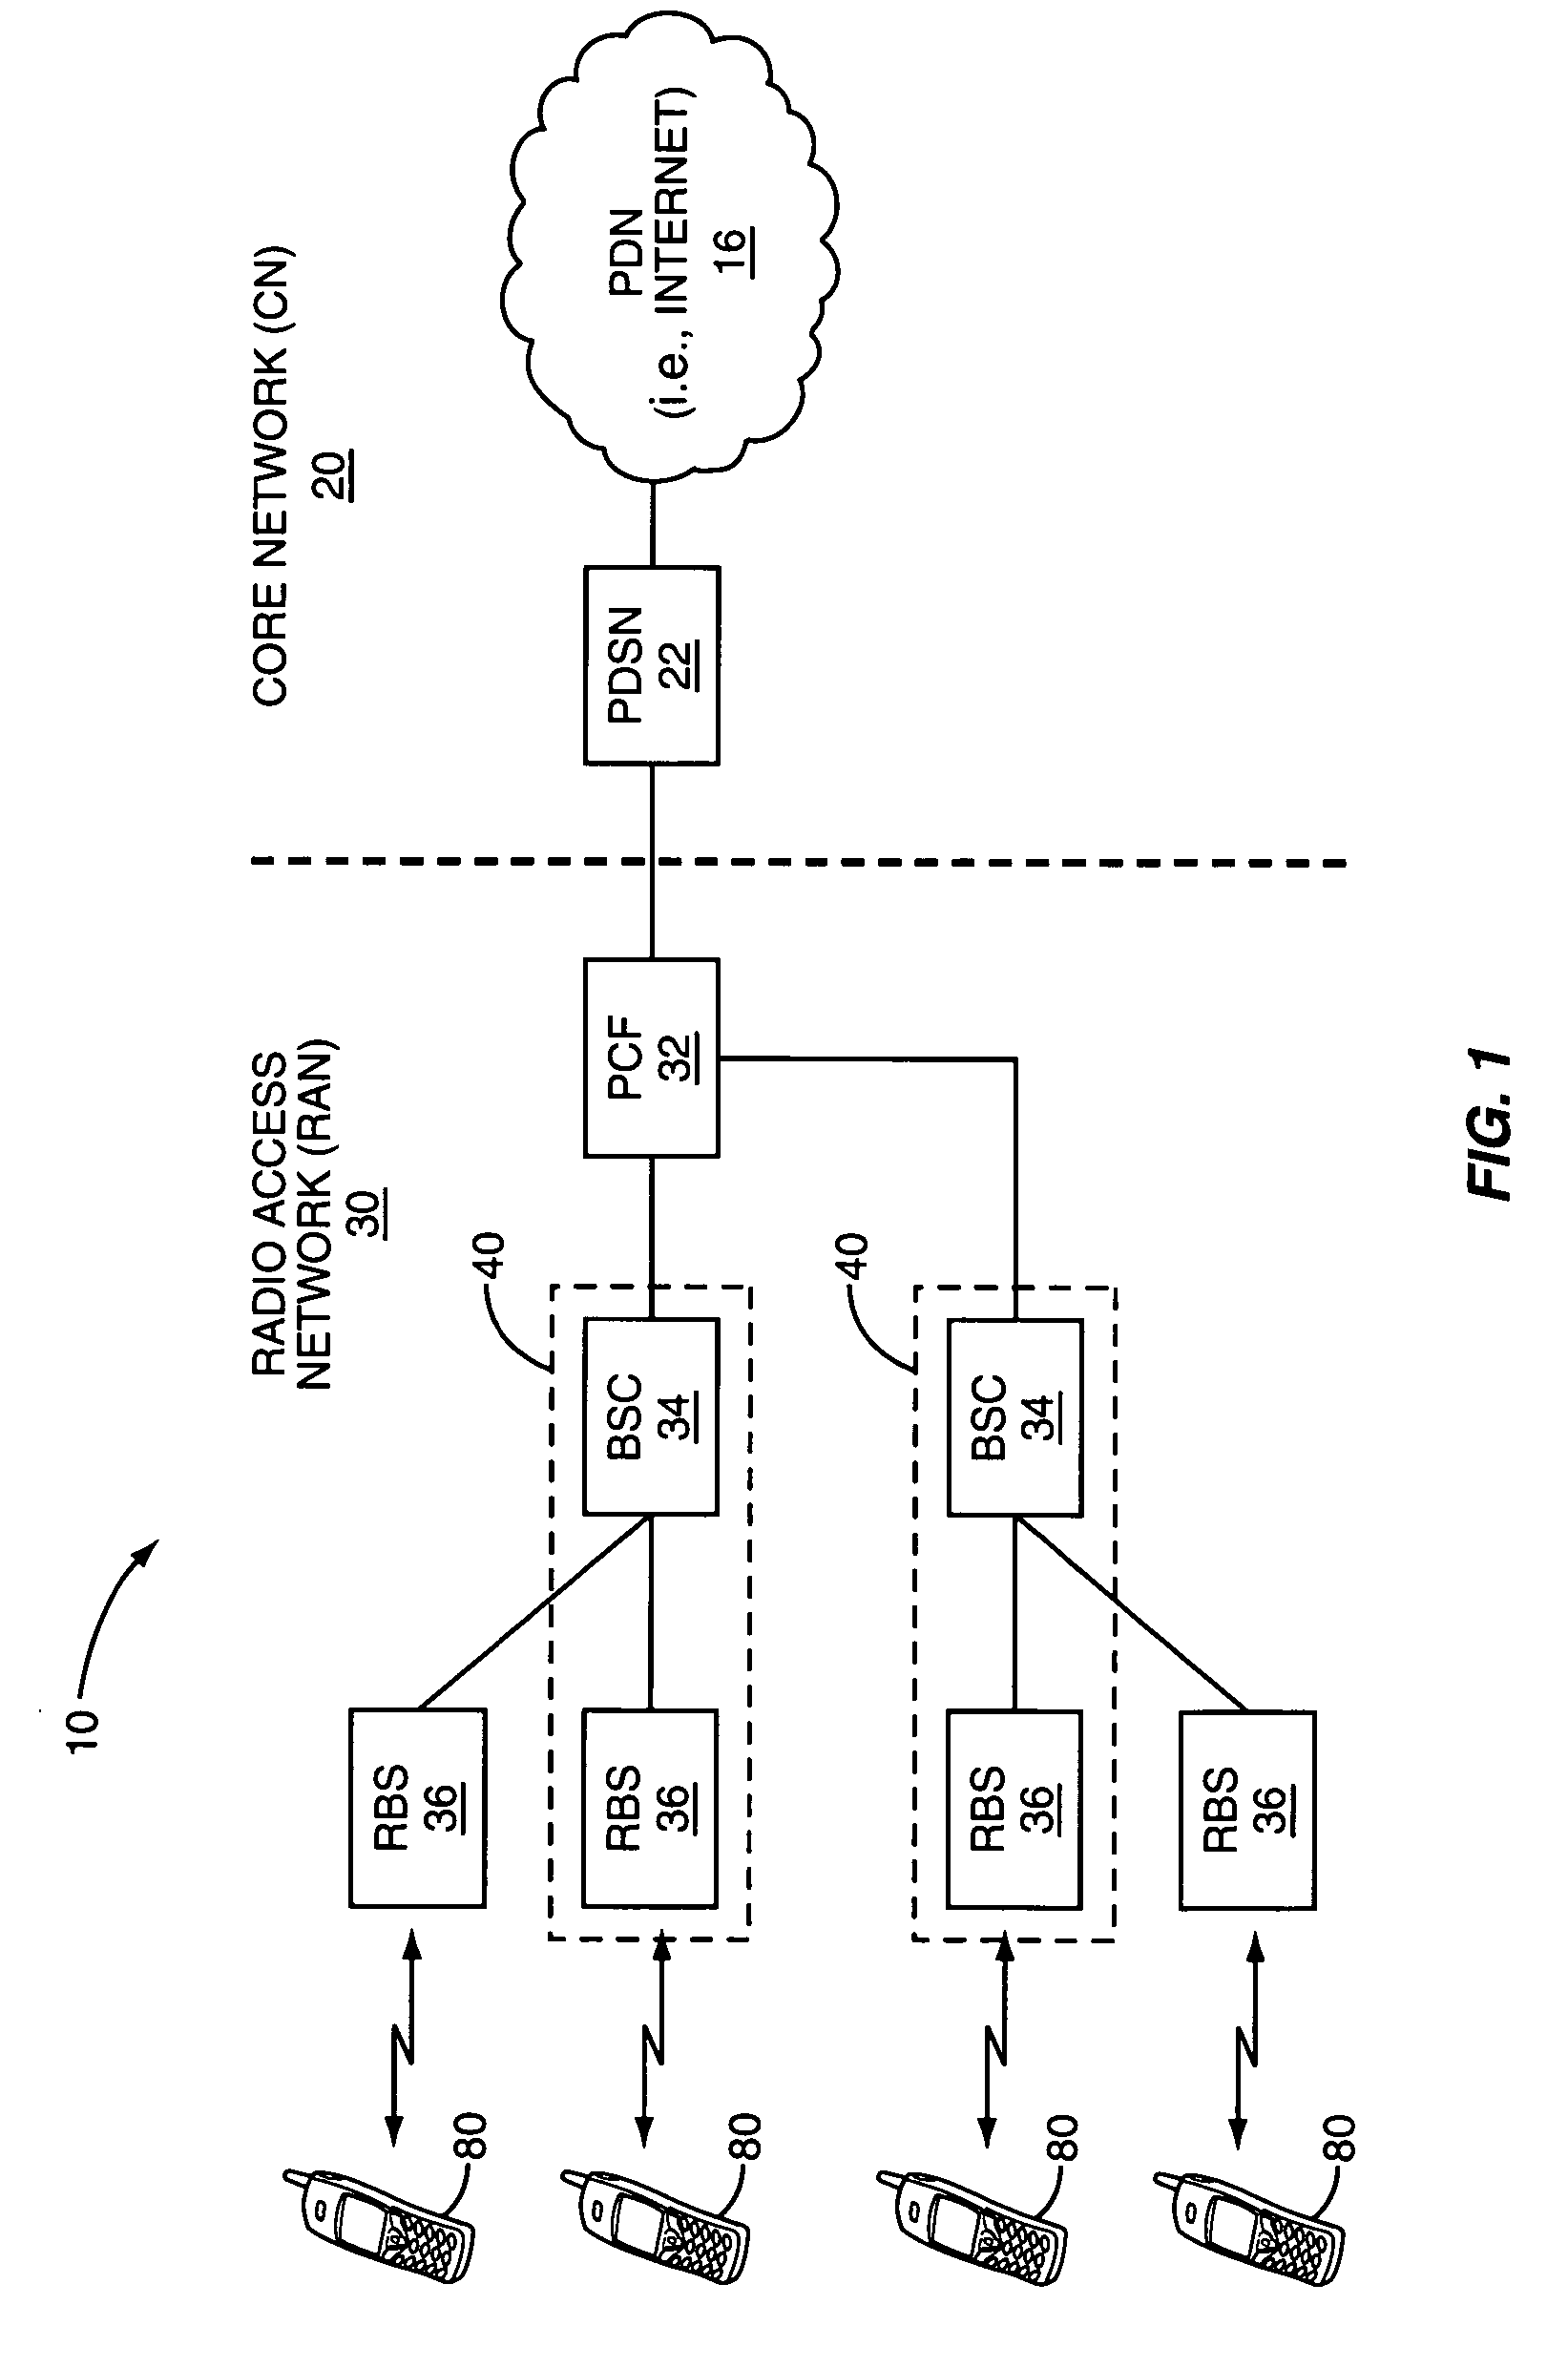 Scheduling method for wireless packet data channel